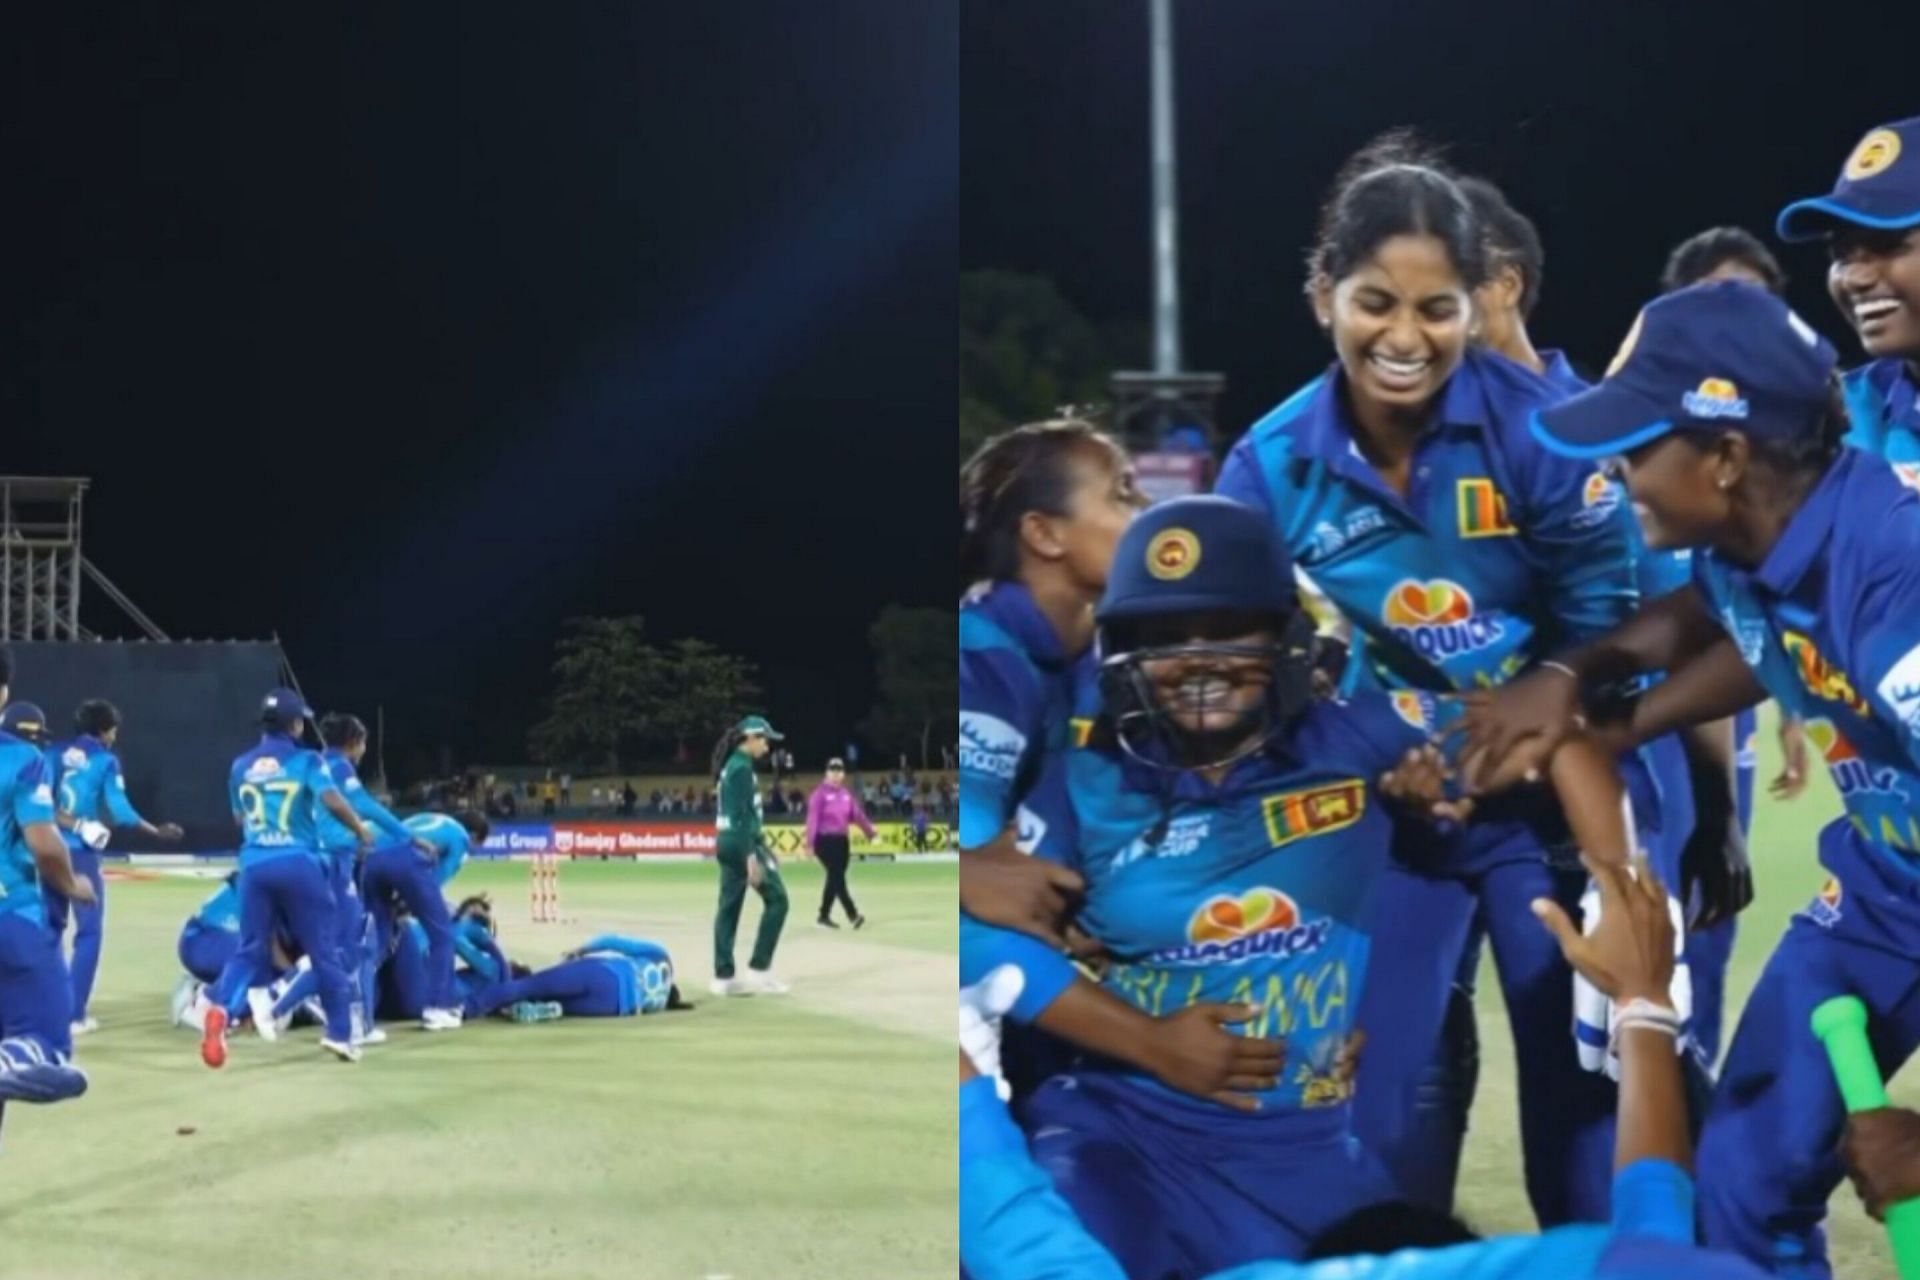 [Watch] Sri Lankan players storm onto the field as they beat Pakistan in the semi-final of the Women's Asia Cup